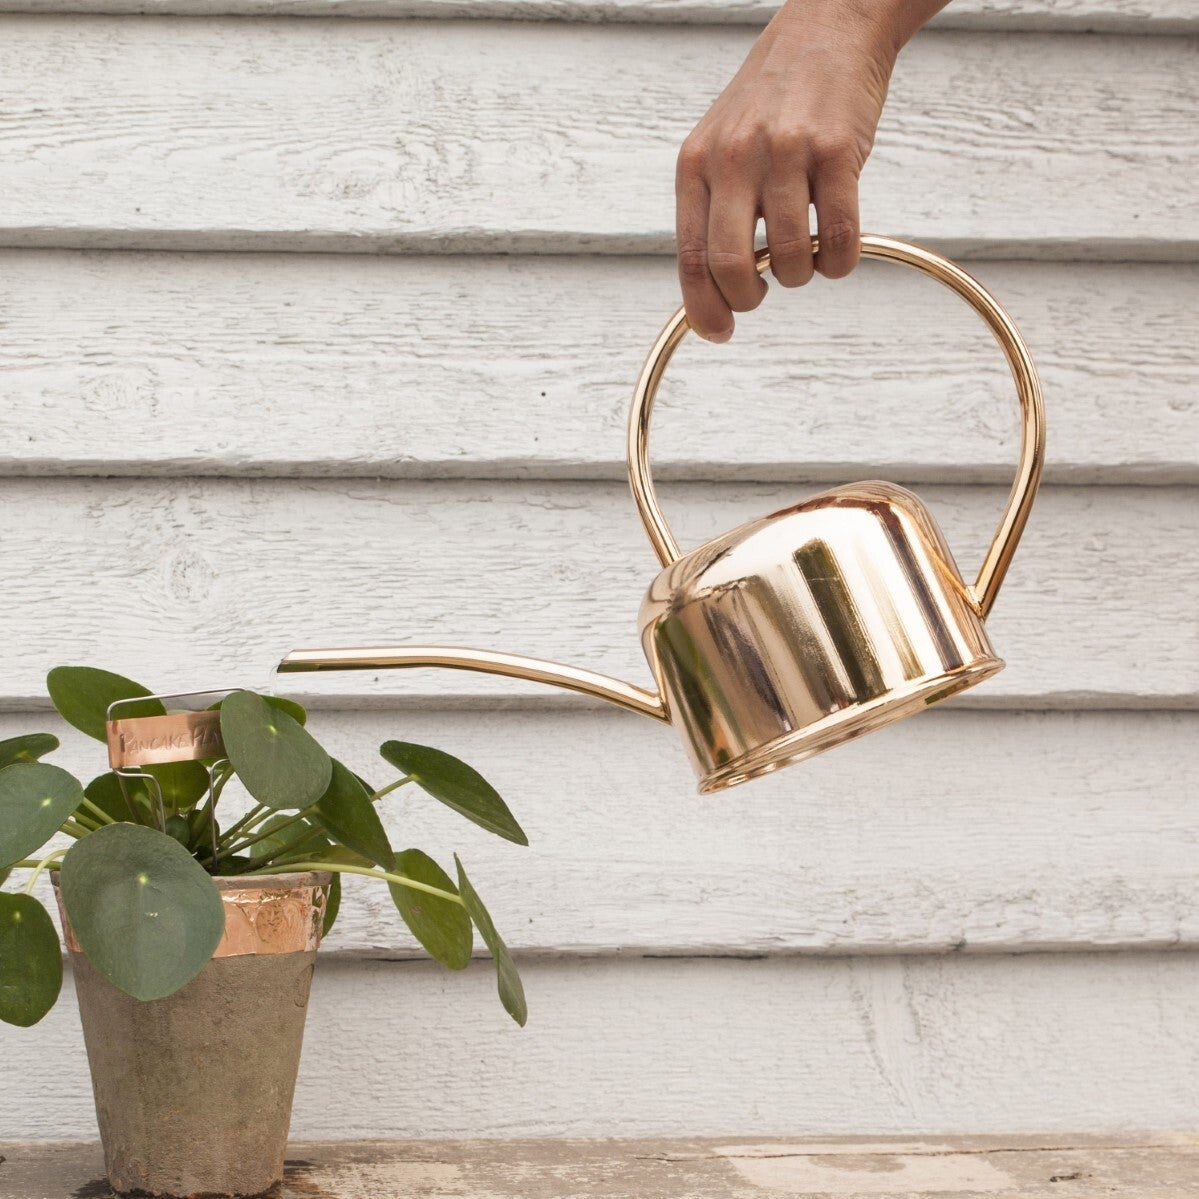 Watering/Can